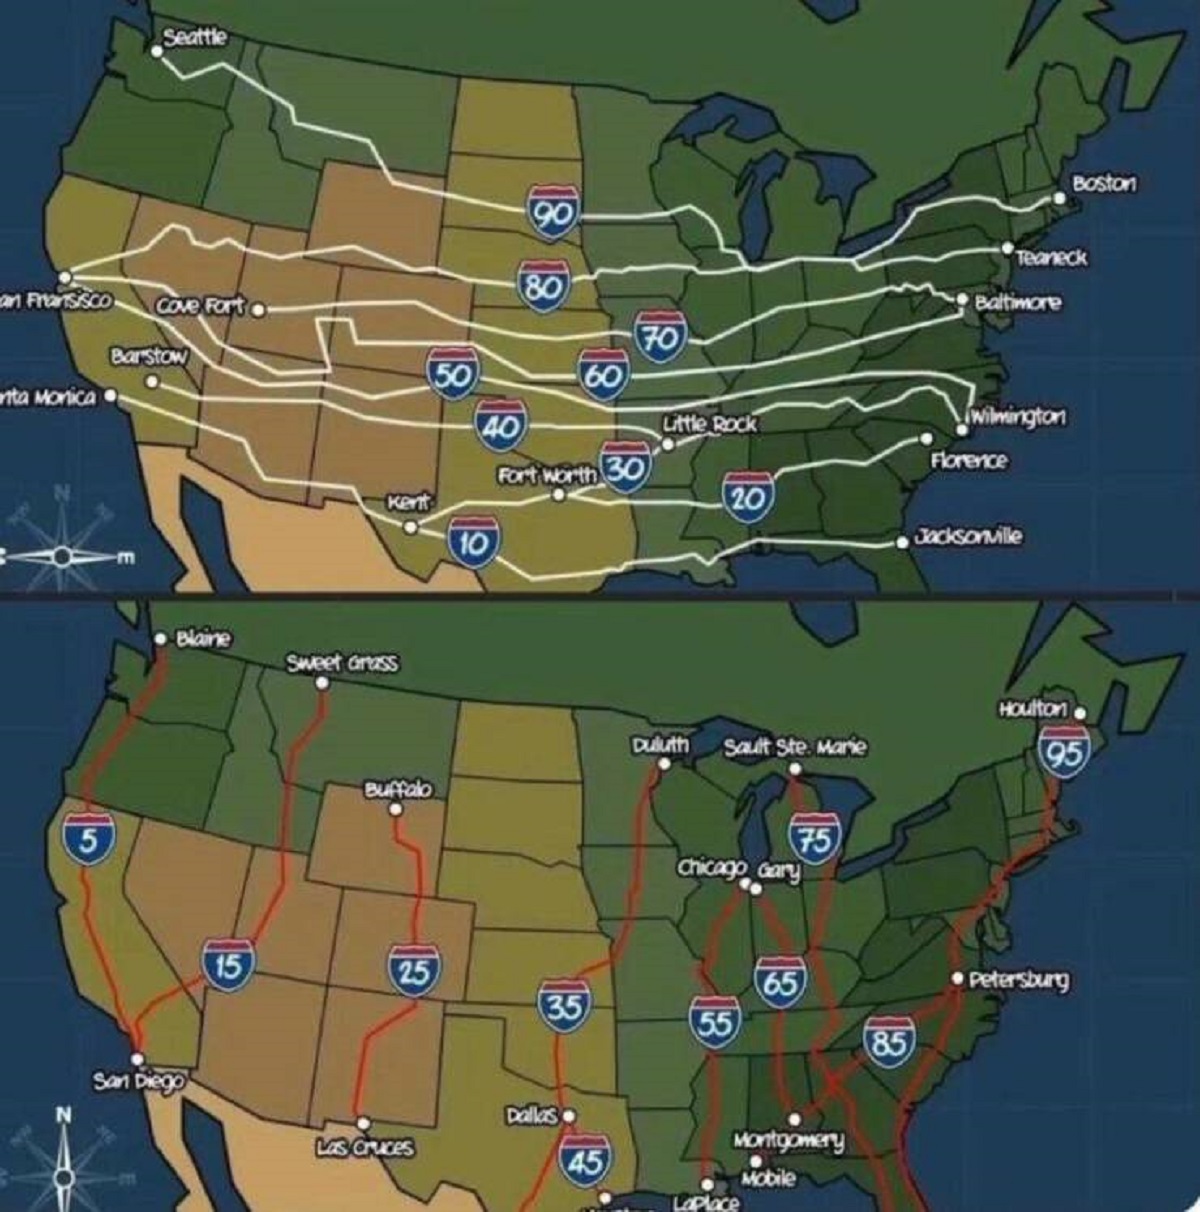 US interstates are numbered in numerical order